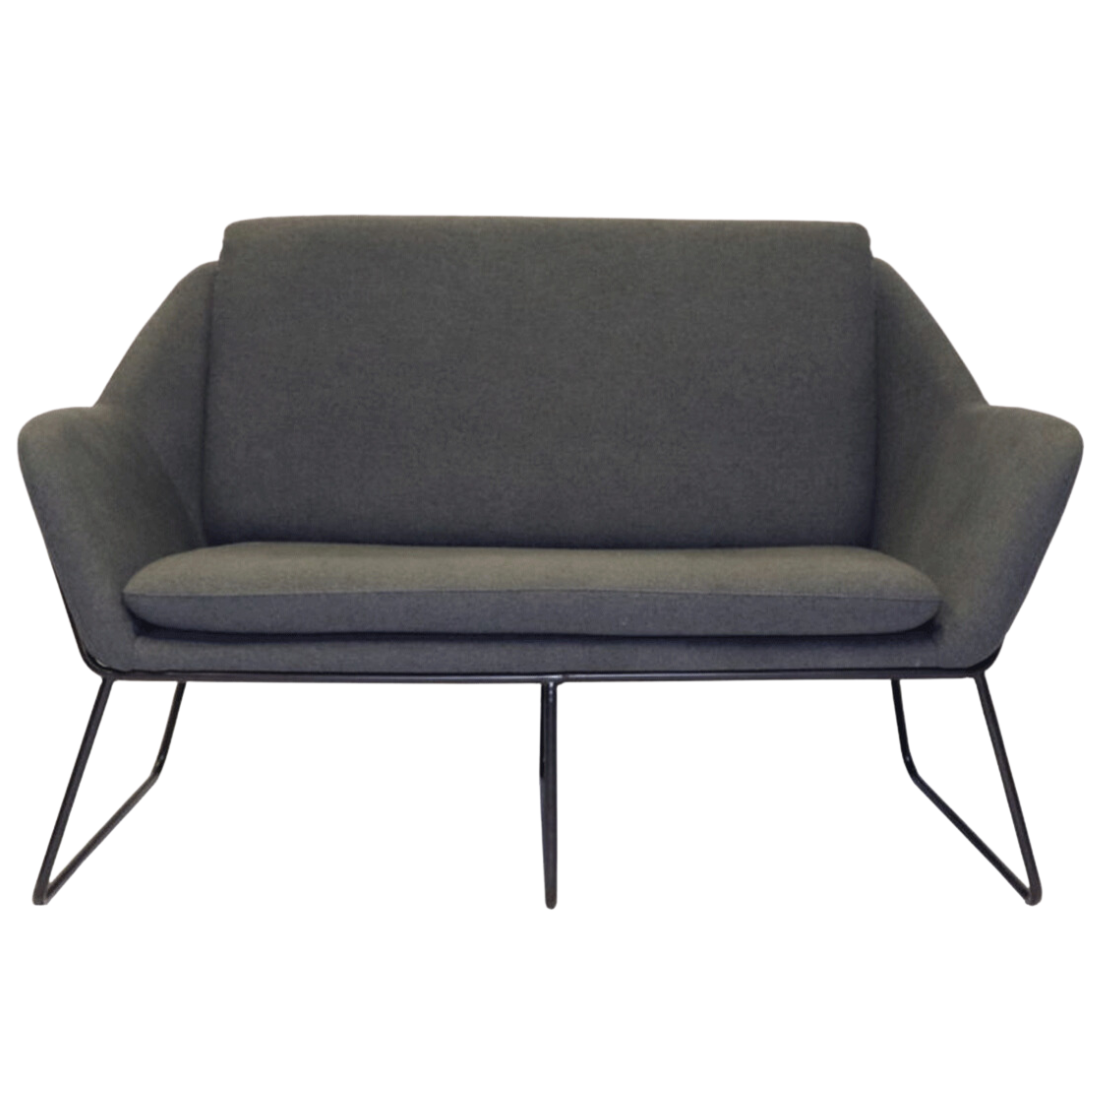 Cardinal Lounge Chair 2 Seater - Switch Office